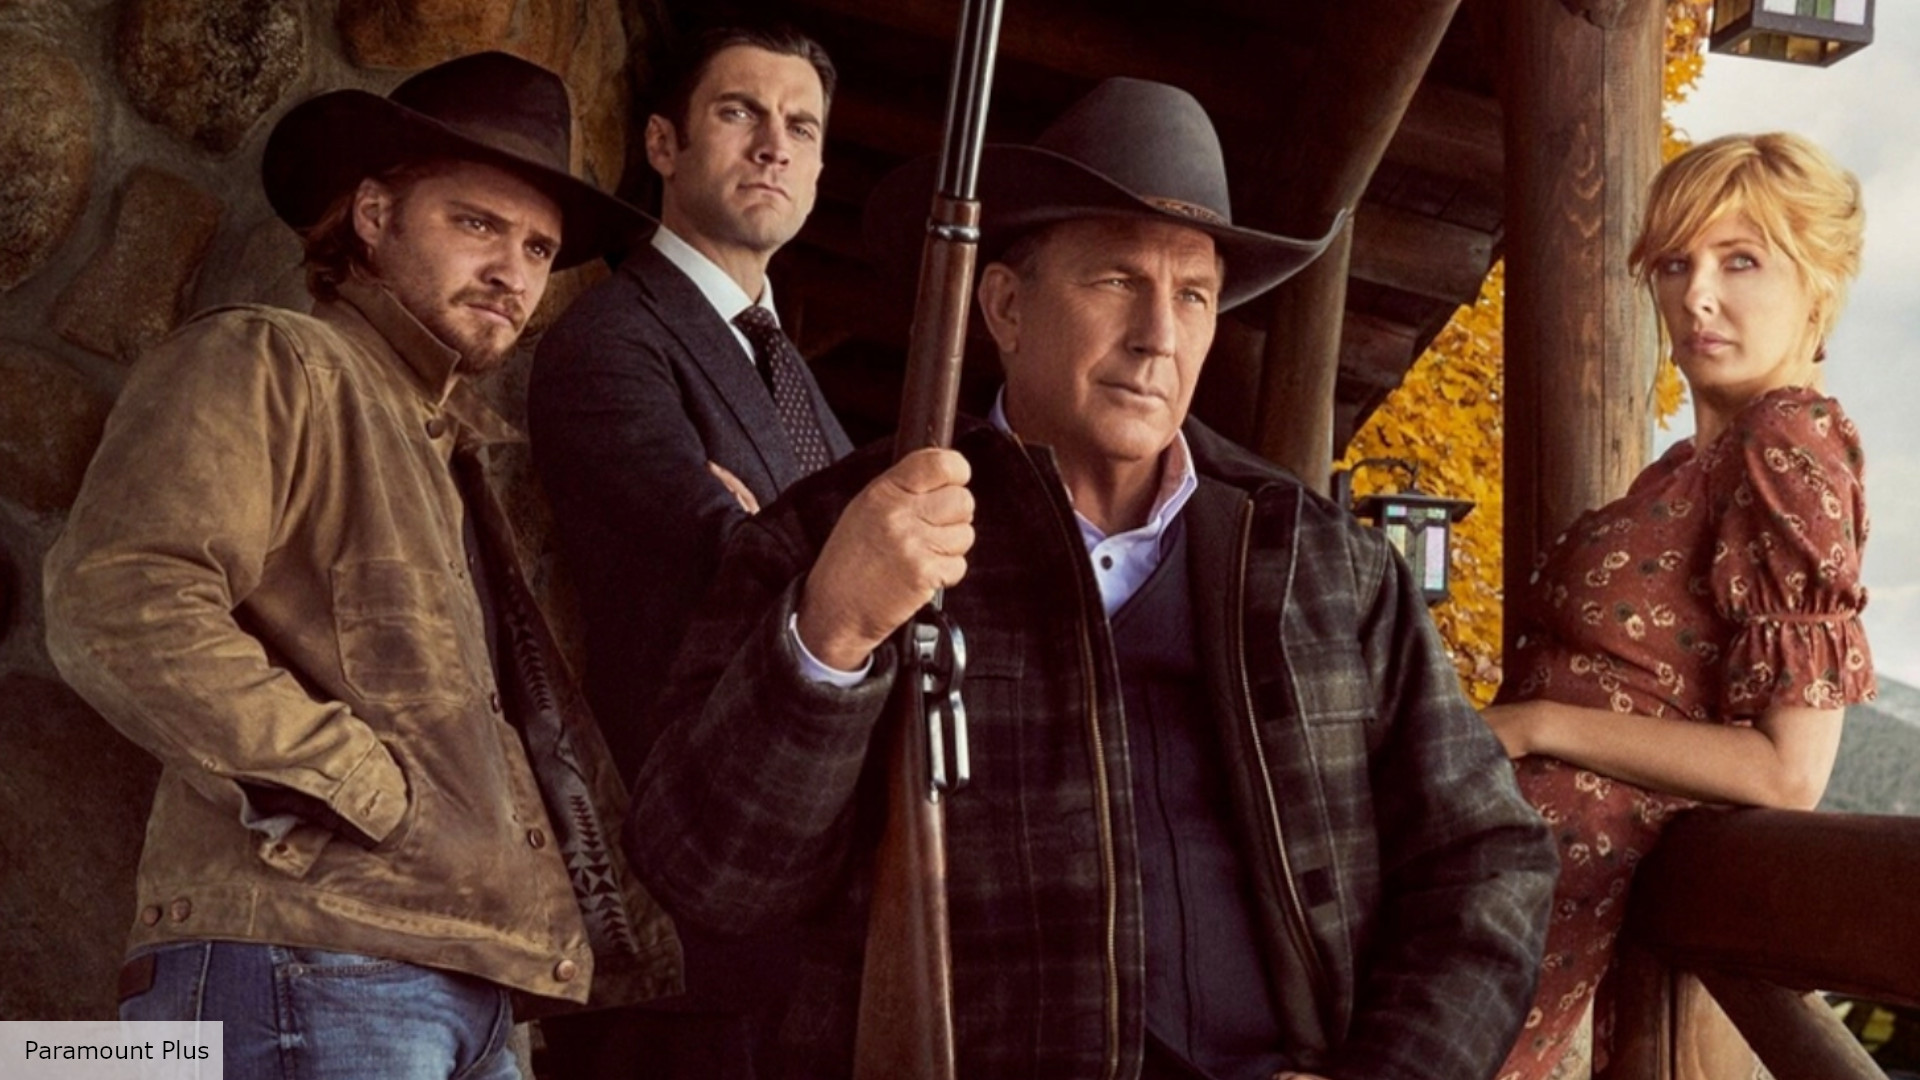 Yellowstone star thinks the drama series will end “the right way”